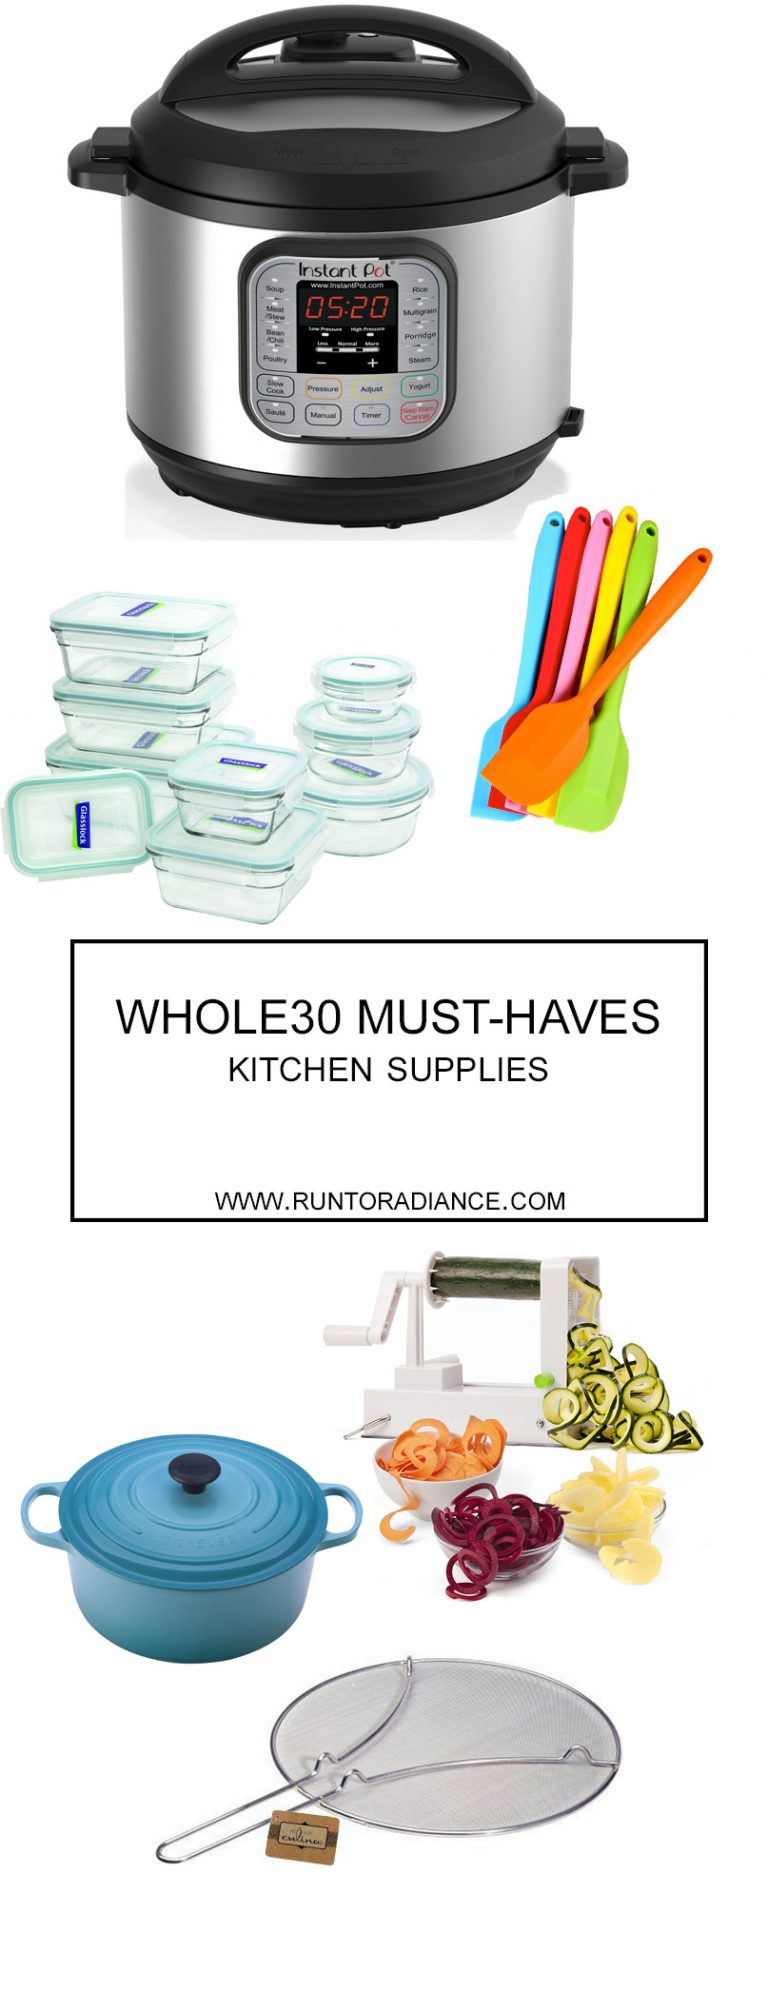 Whole30 Must-Haves